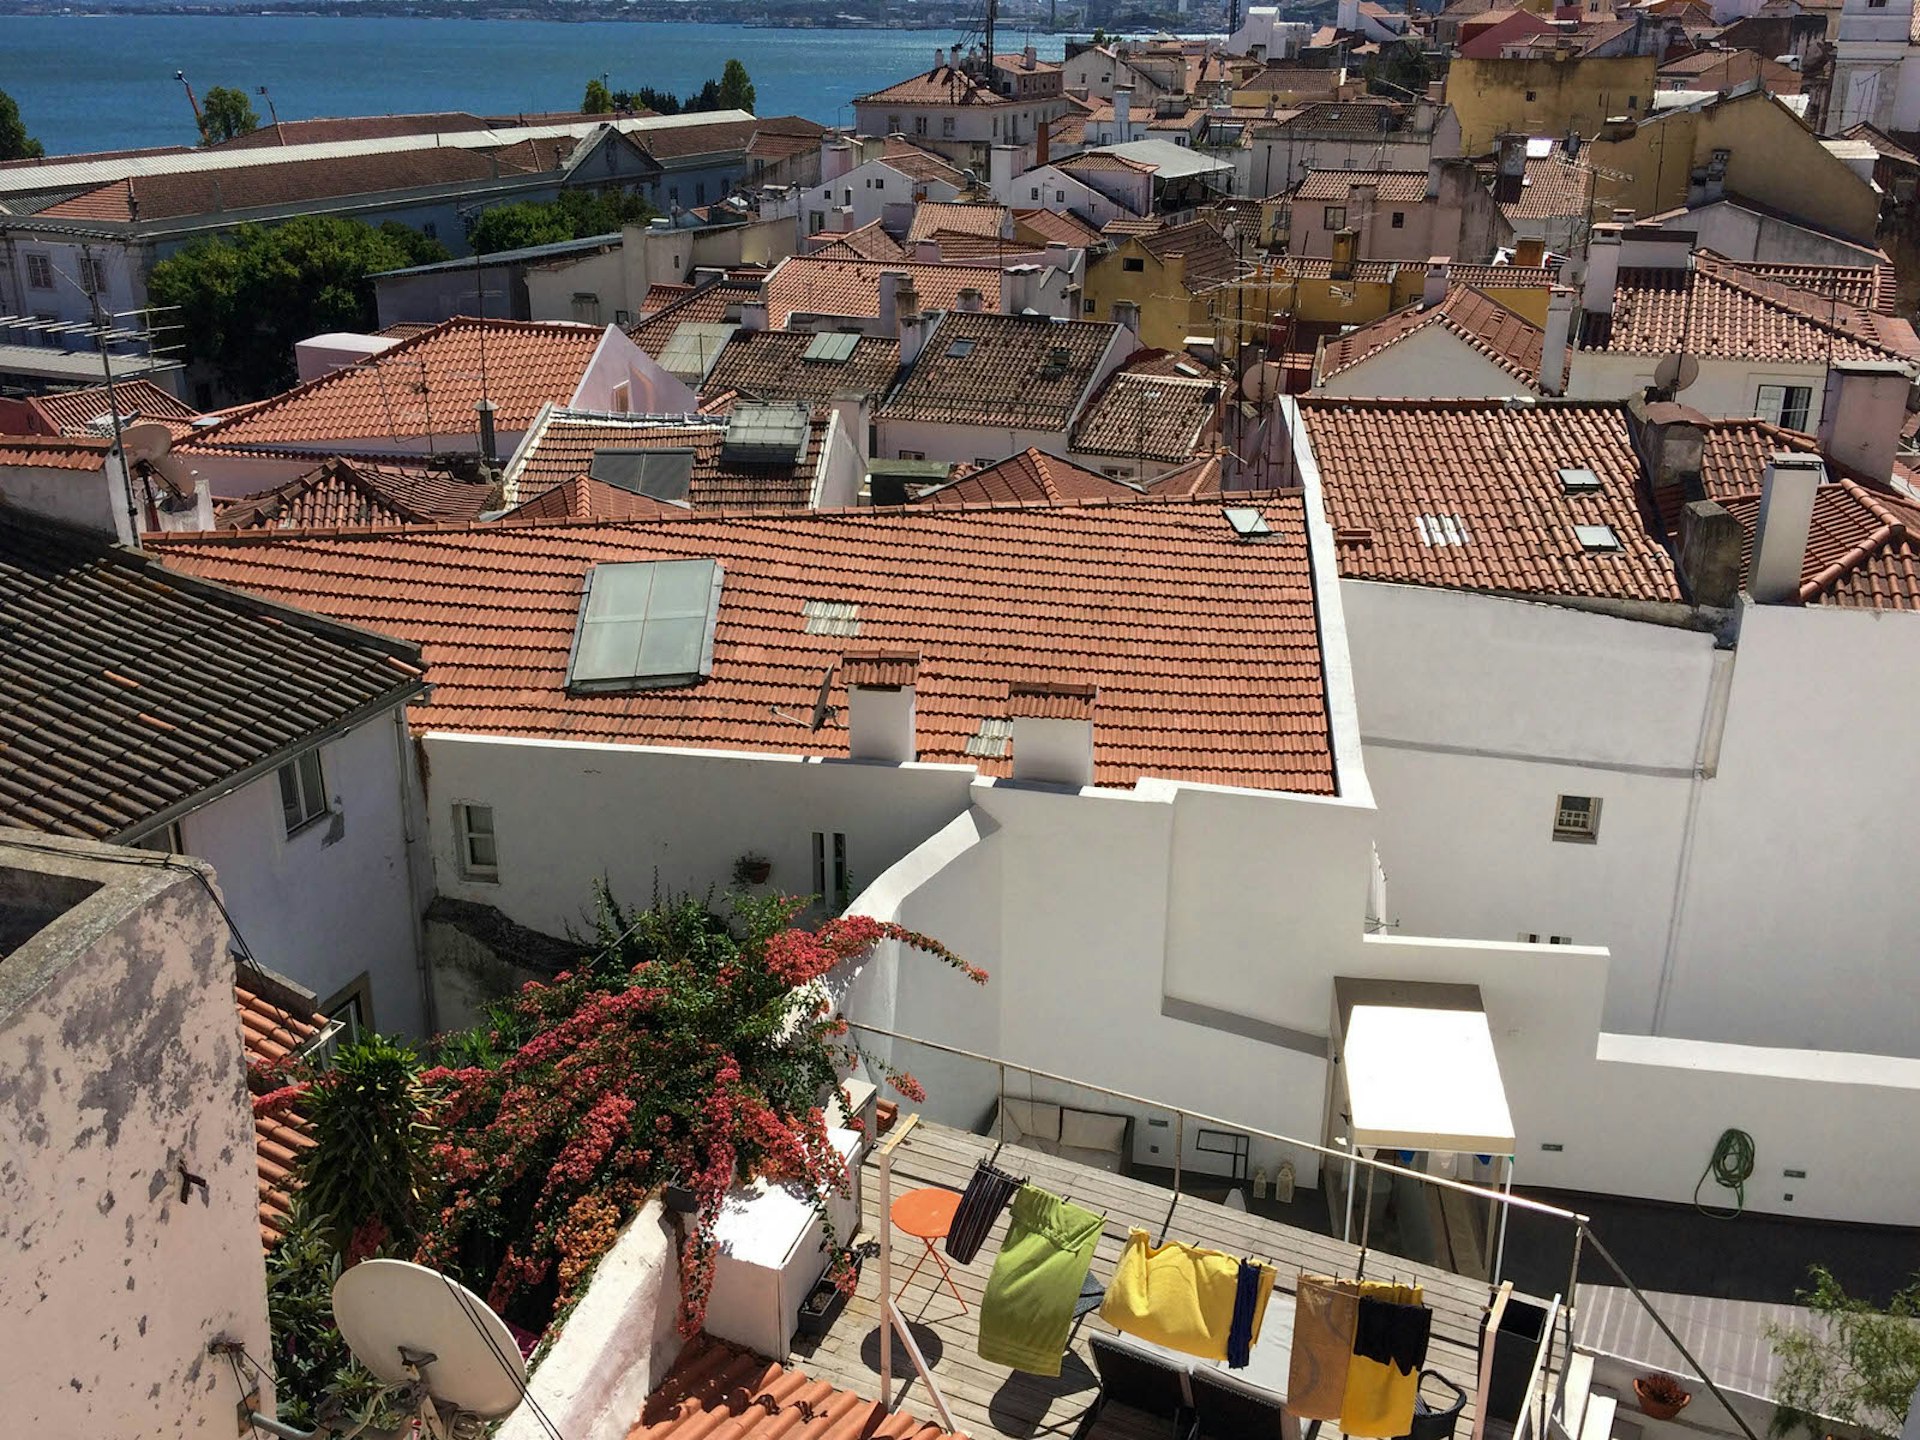 View over sunbathed patios and terracotta rooftops